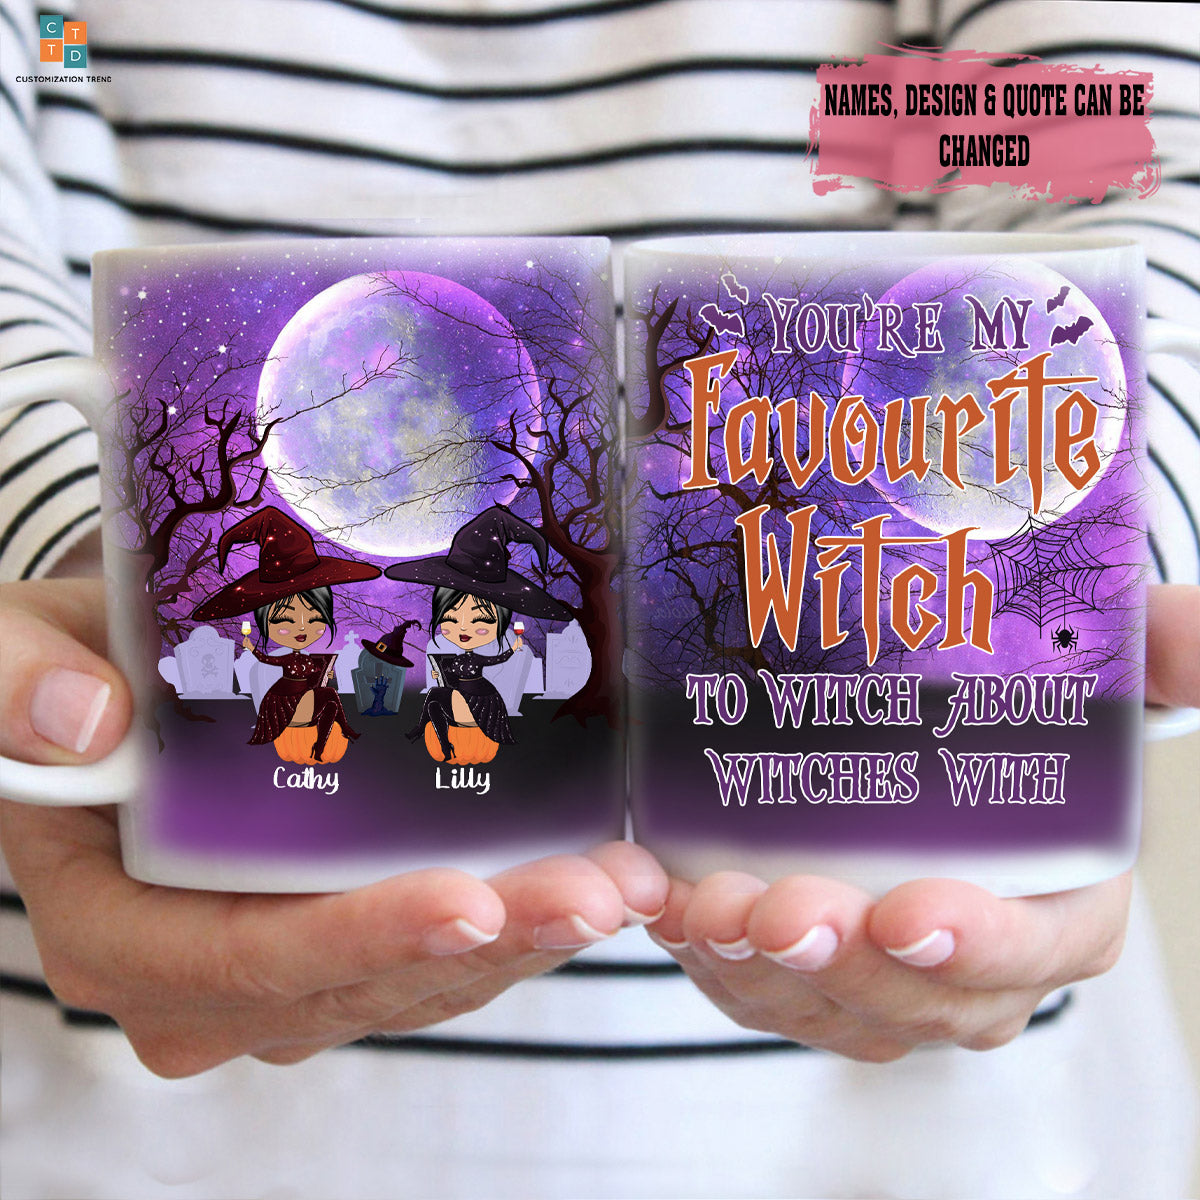 PersonalizedYou’re My Favorite Witch To Witch About Witches With Mug , Custom Friend , Bestie , Sister Mug